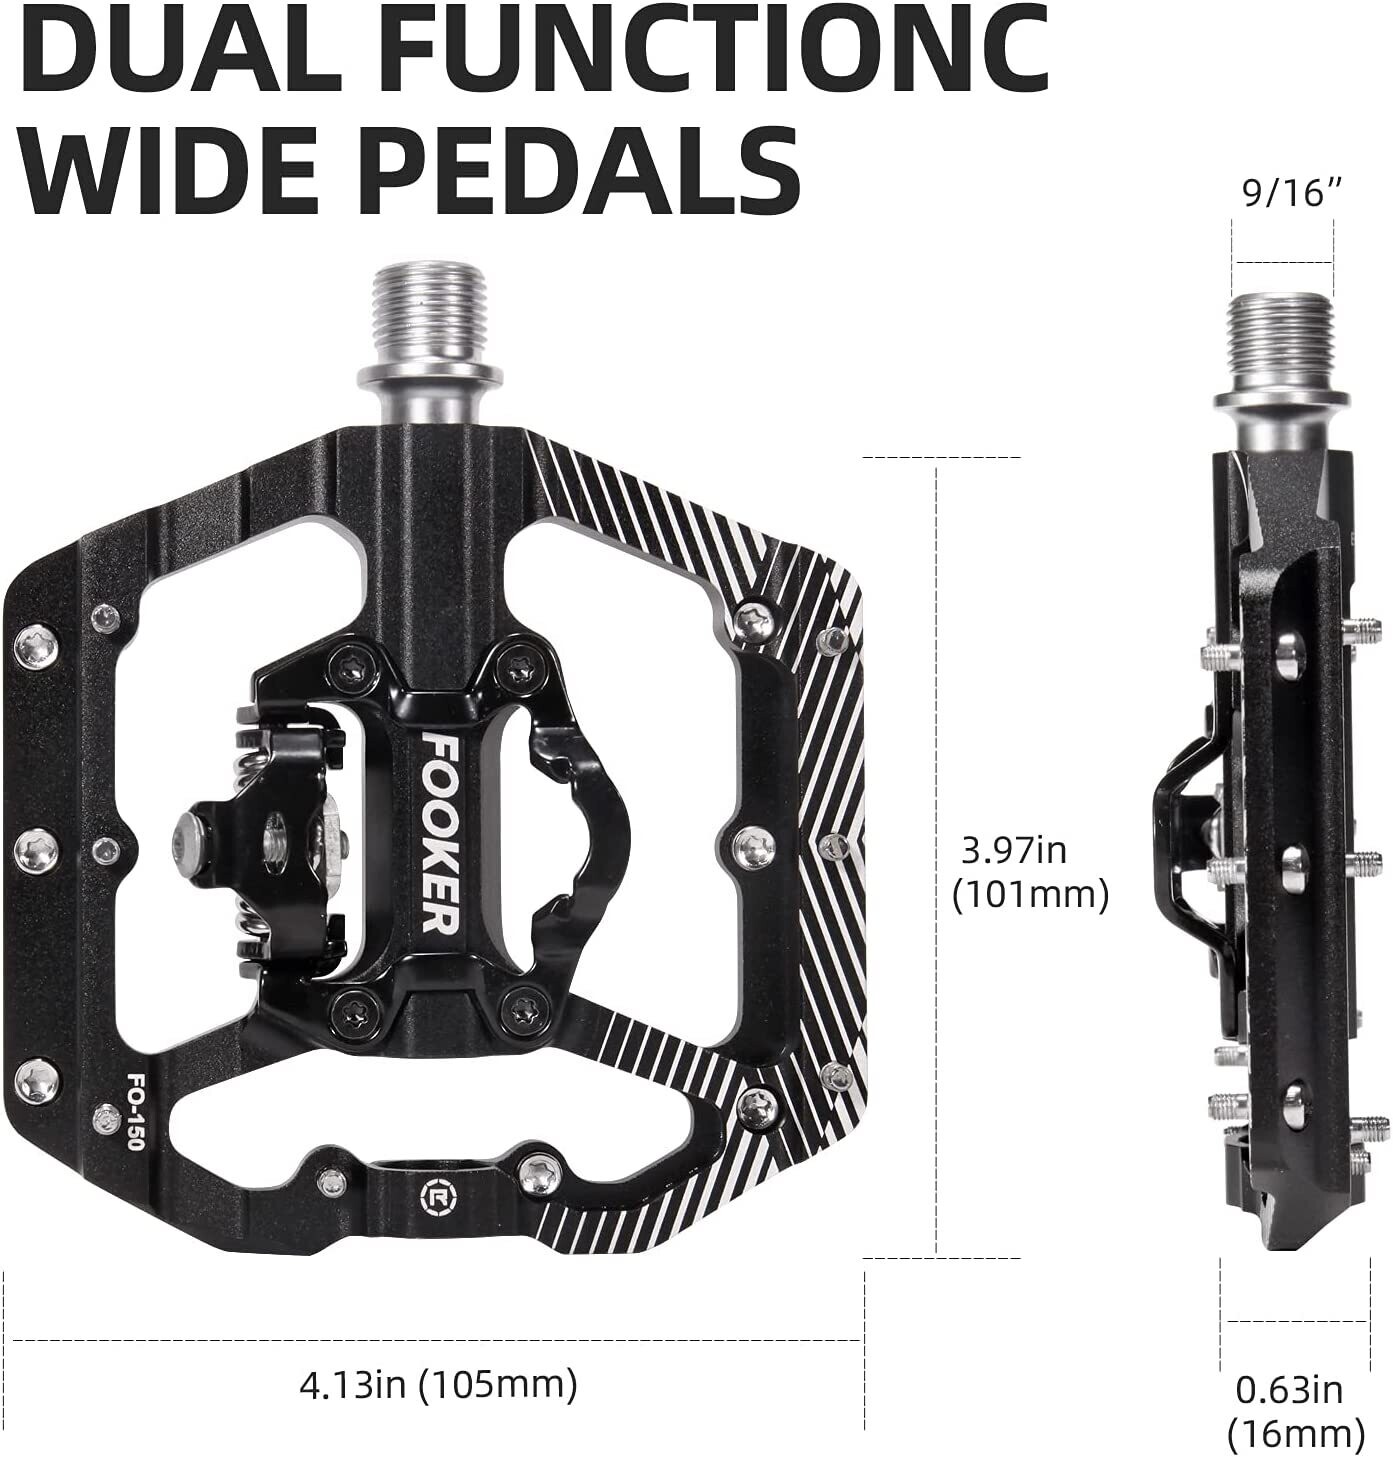 MTB Mountain Bike Pedals 3 Bearing Flat Platform Compatible with SPD Dual Function Sealed Clipless Aluminum 9/16" Pedals with Cleats